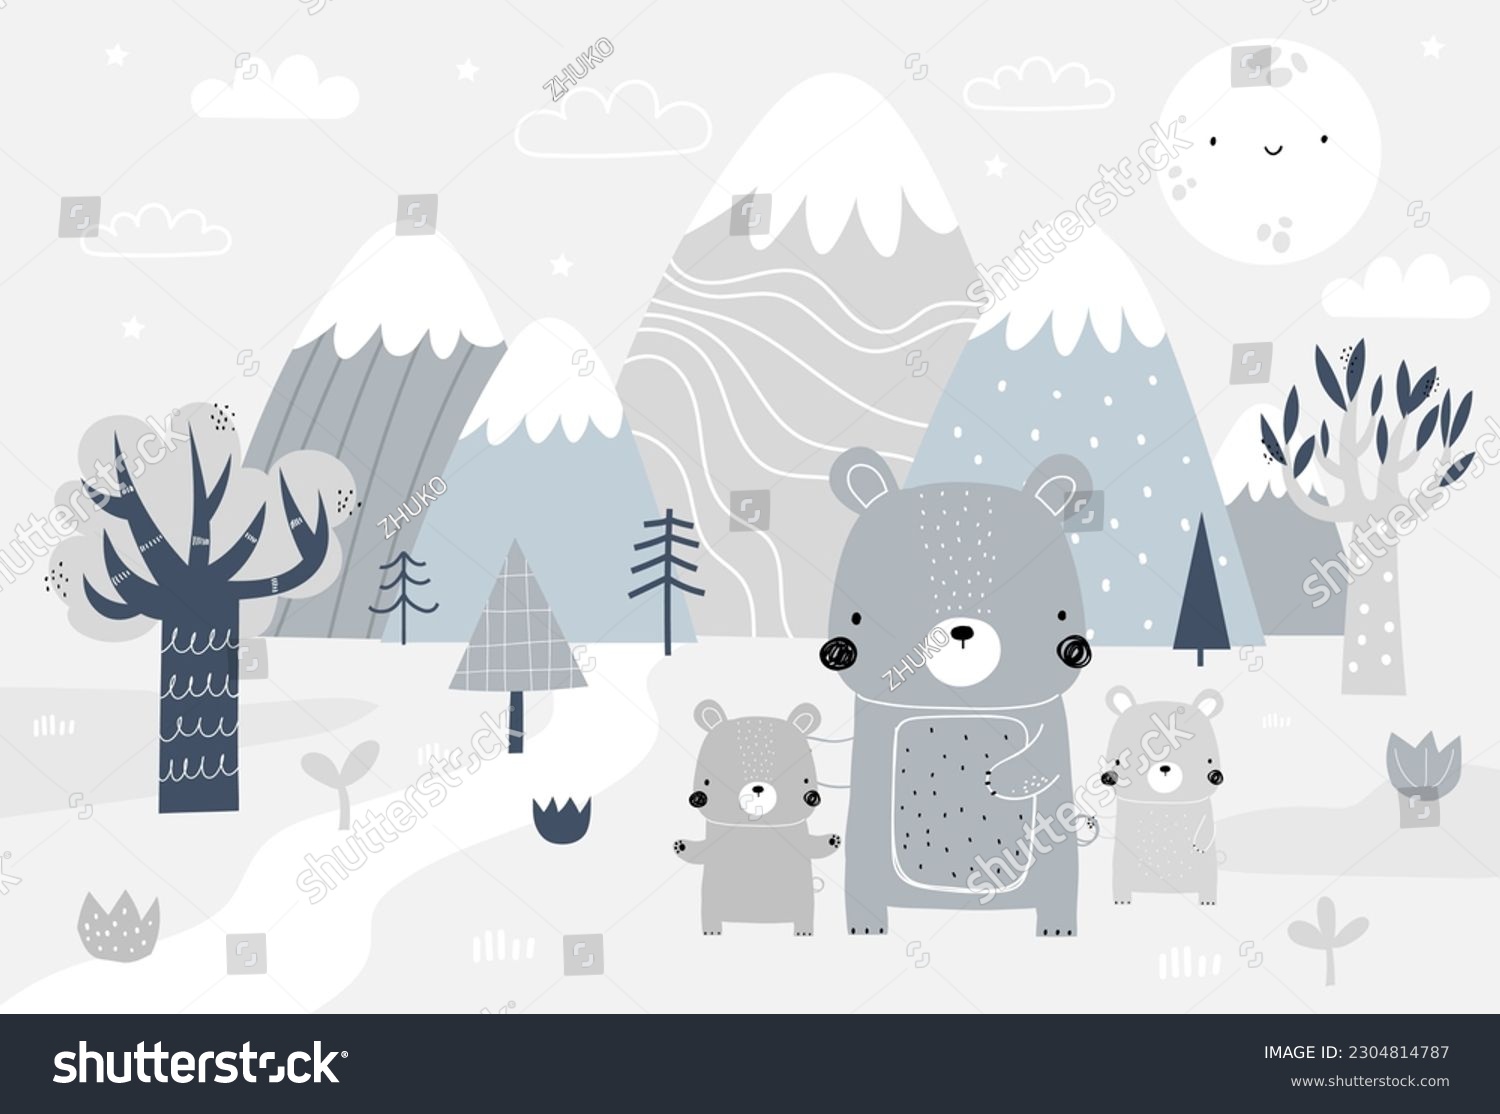 SVG of Vector children hand drawn mountain and cute bears illustration in scandinavian style. Mountain landscape, clouds. Children's forest wallpaper. Mountainscape, children's room design, wall decor. svg